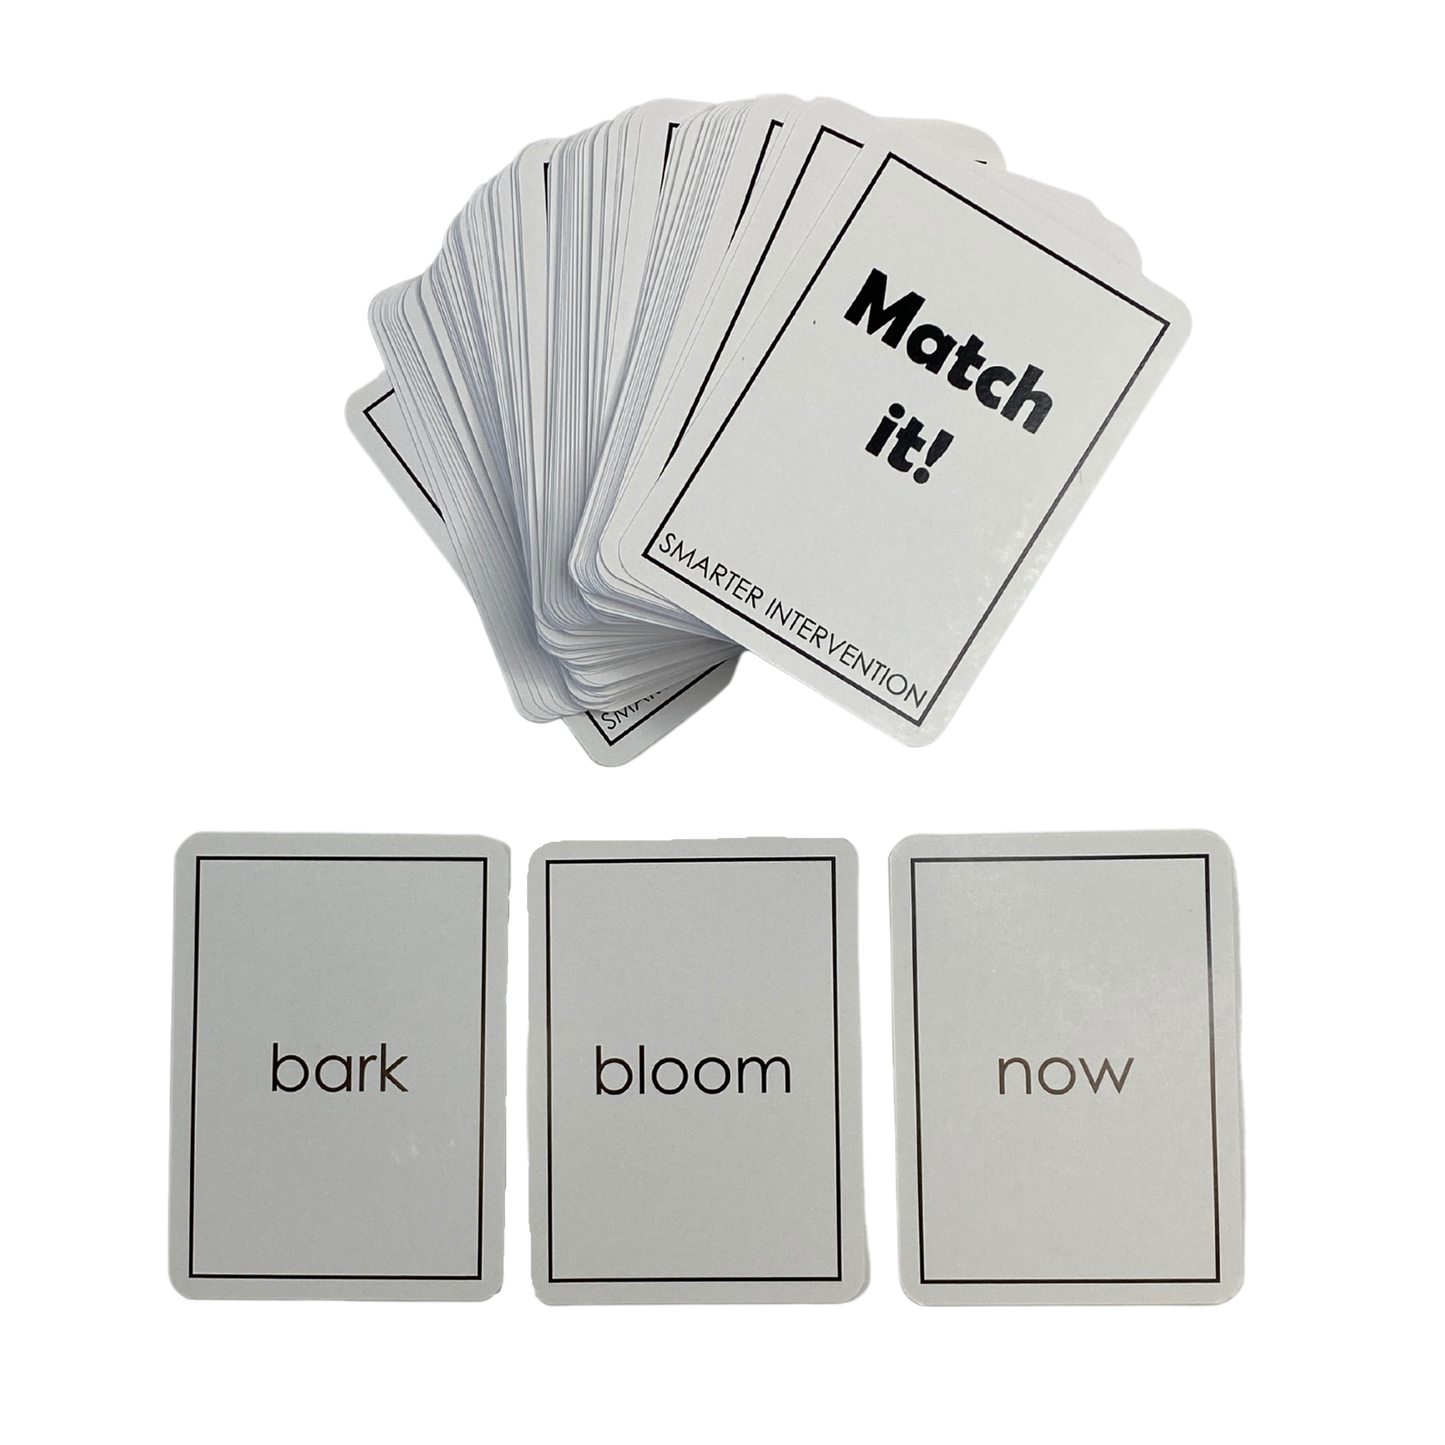 Match It! Syllable Type Game Card Deck